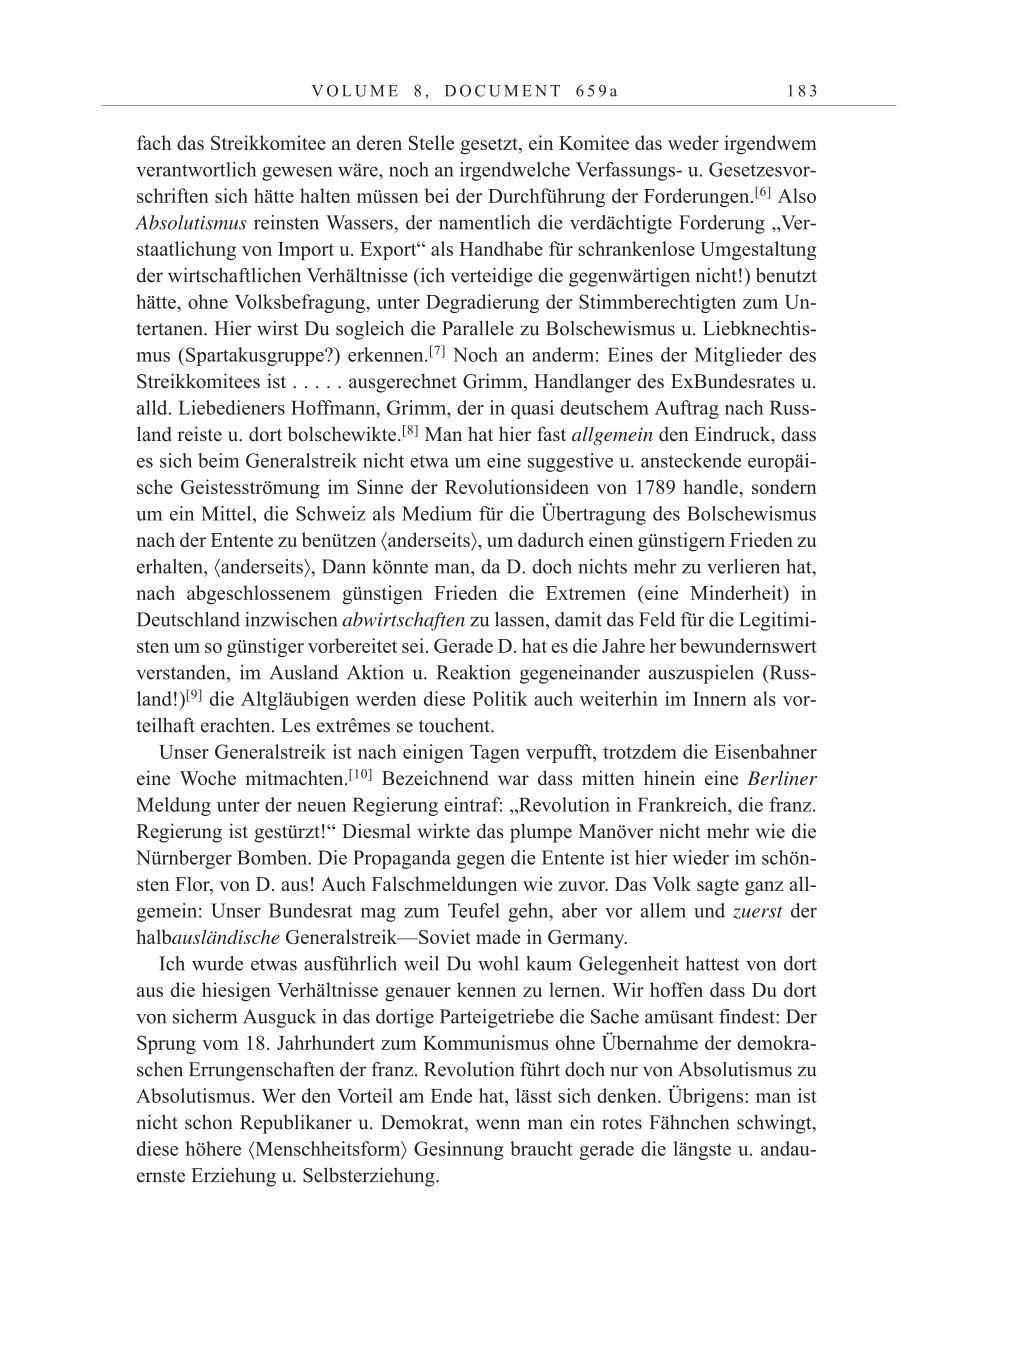 Volume 10: The Berlin Years: Correspondence May-December 1920 / Supplementary Correspondence 1909-1920 page 183